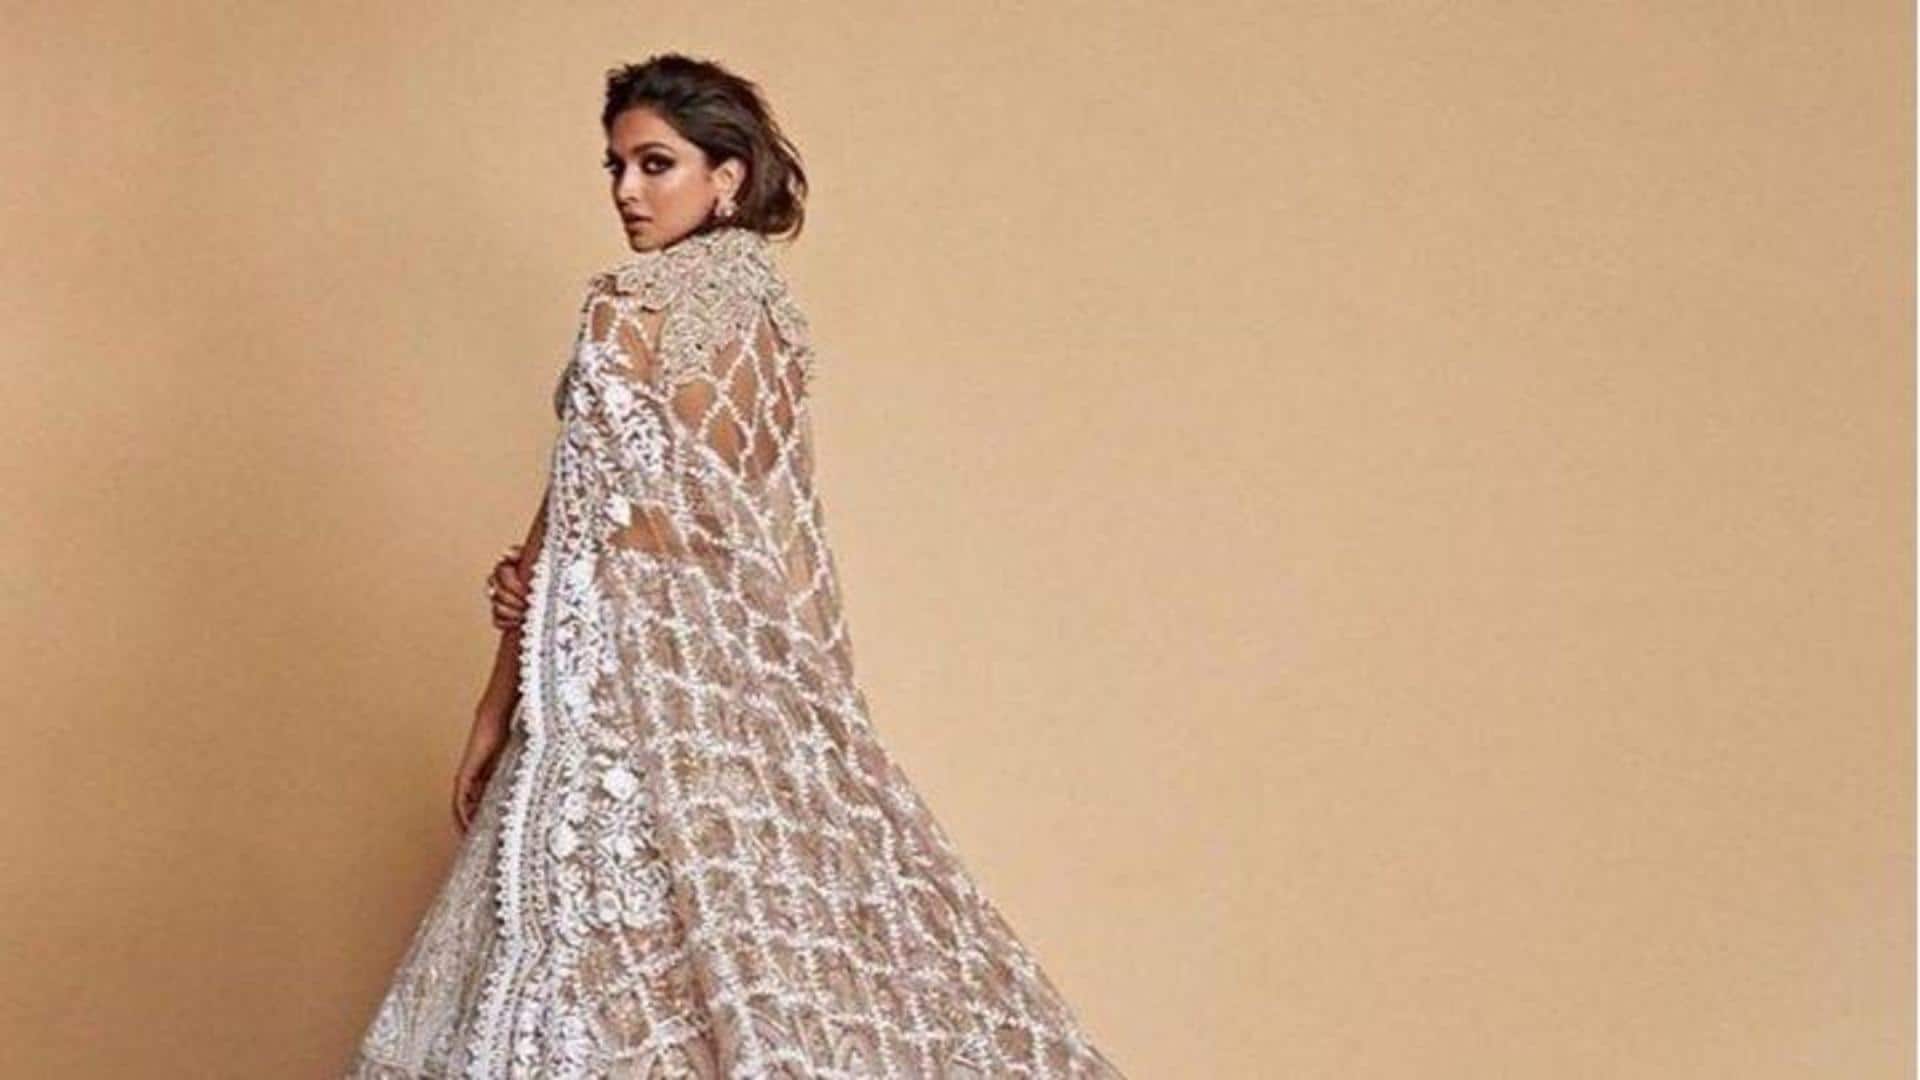 Times Deepika Padukone made India proud on the global stage